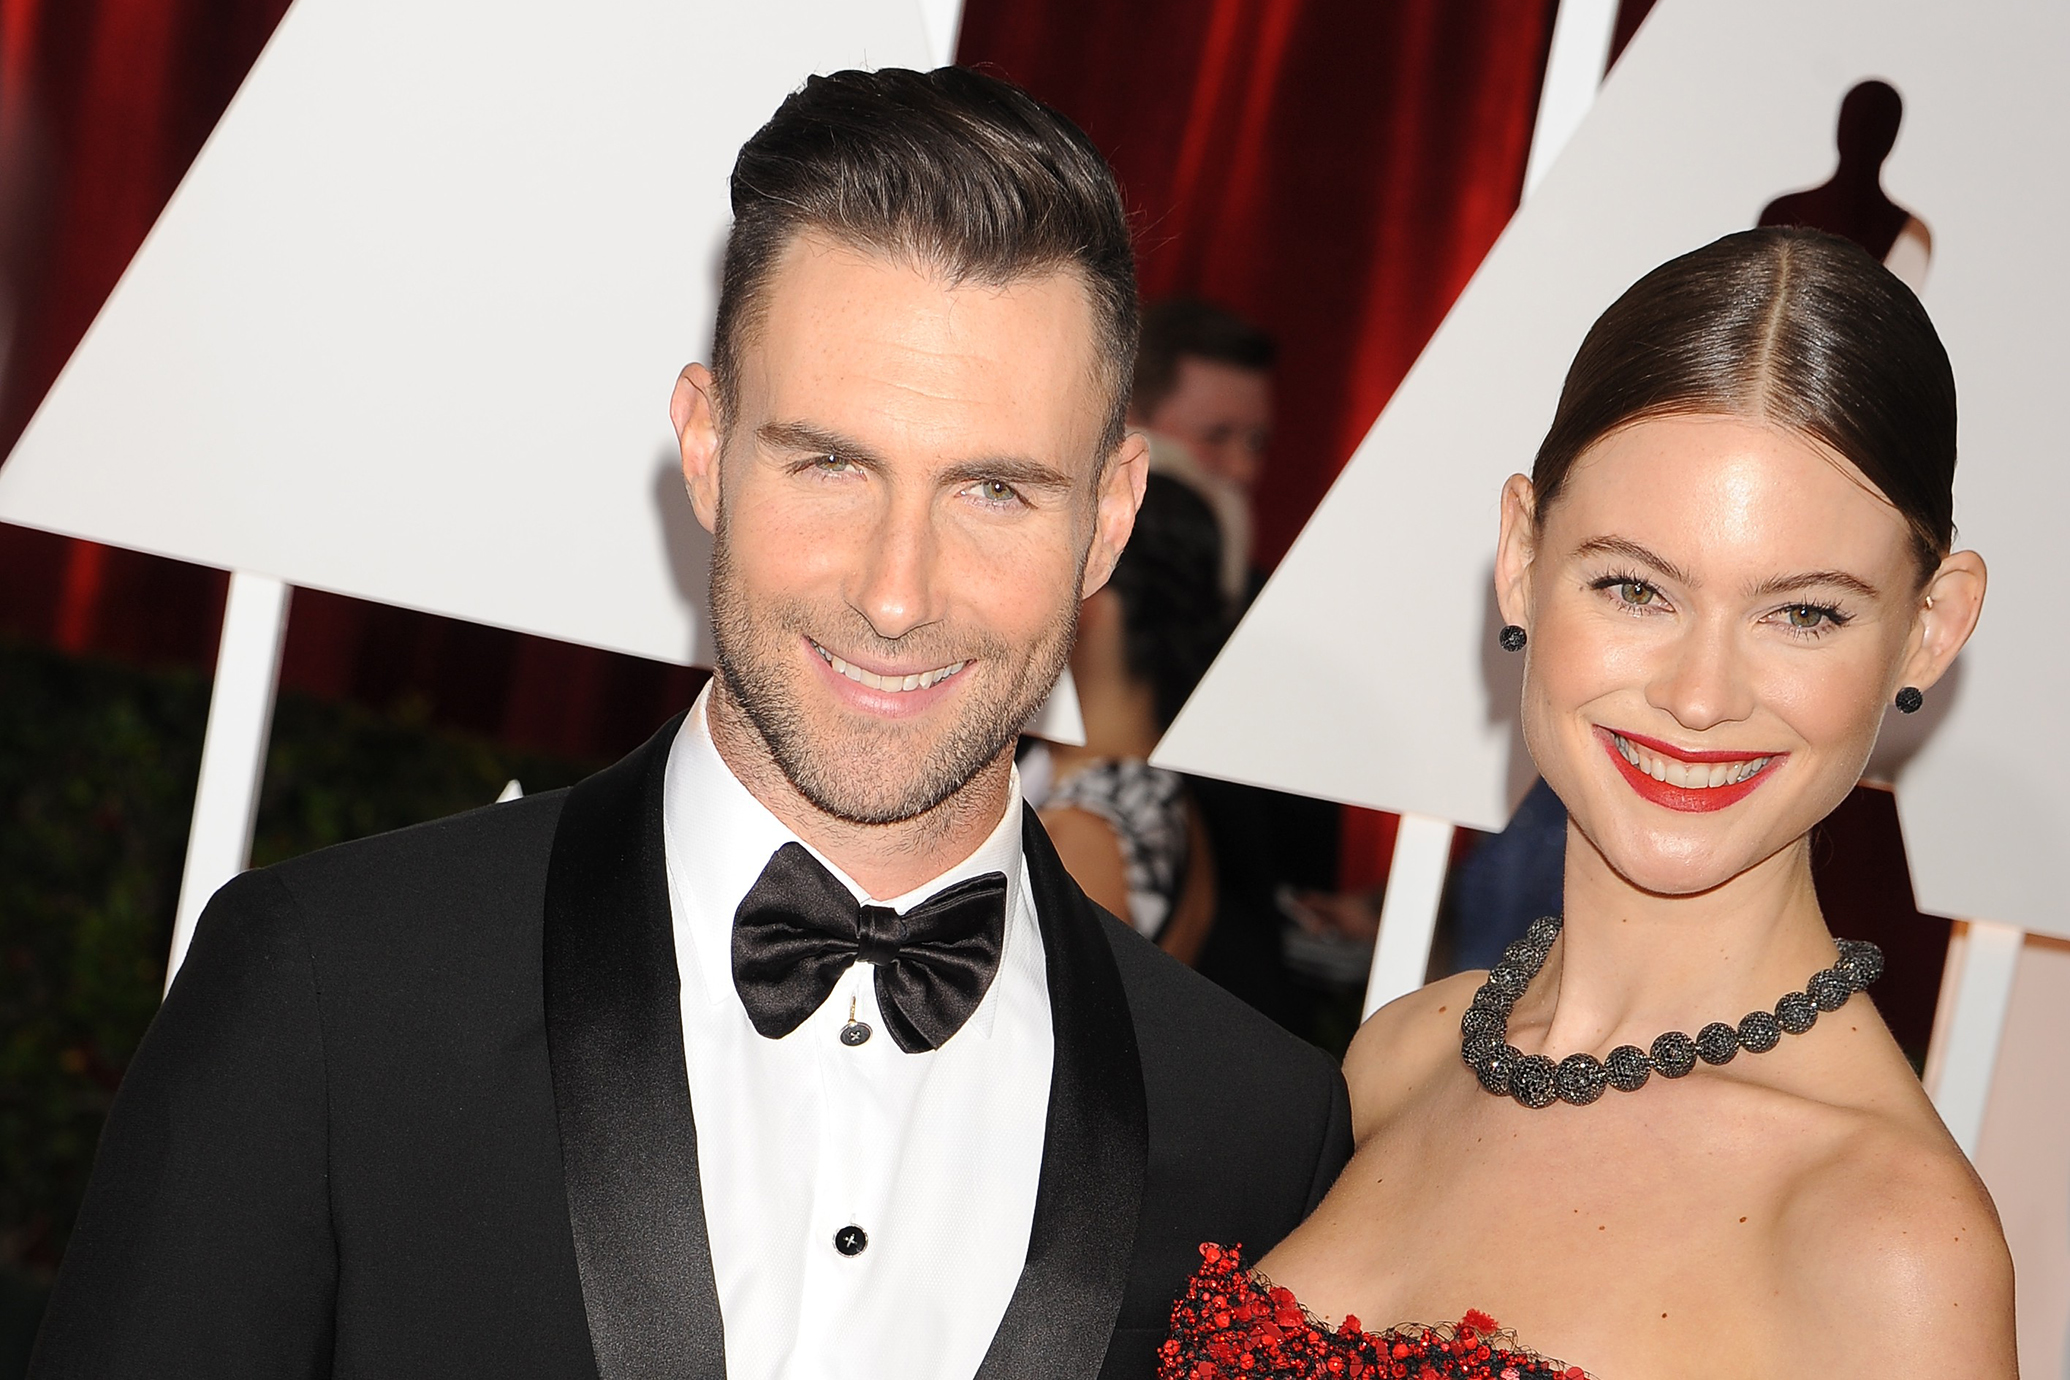 Adam Levine Expecting First Child with Wife Behati Prinsloo.